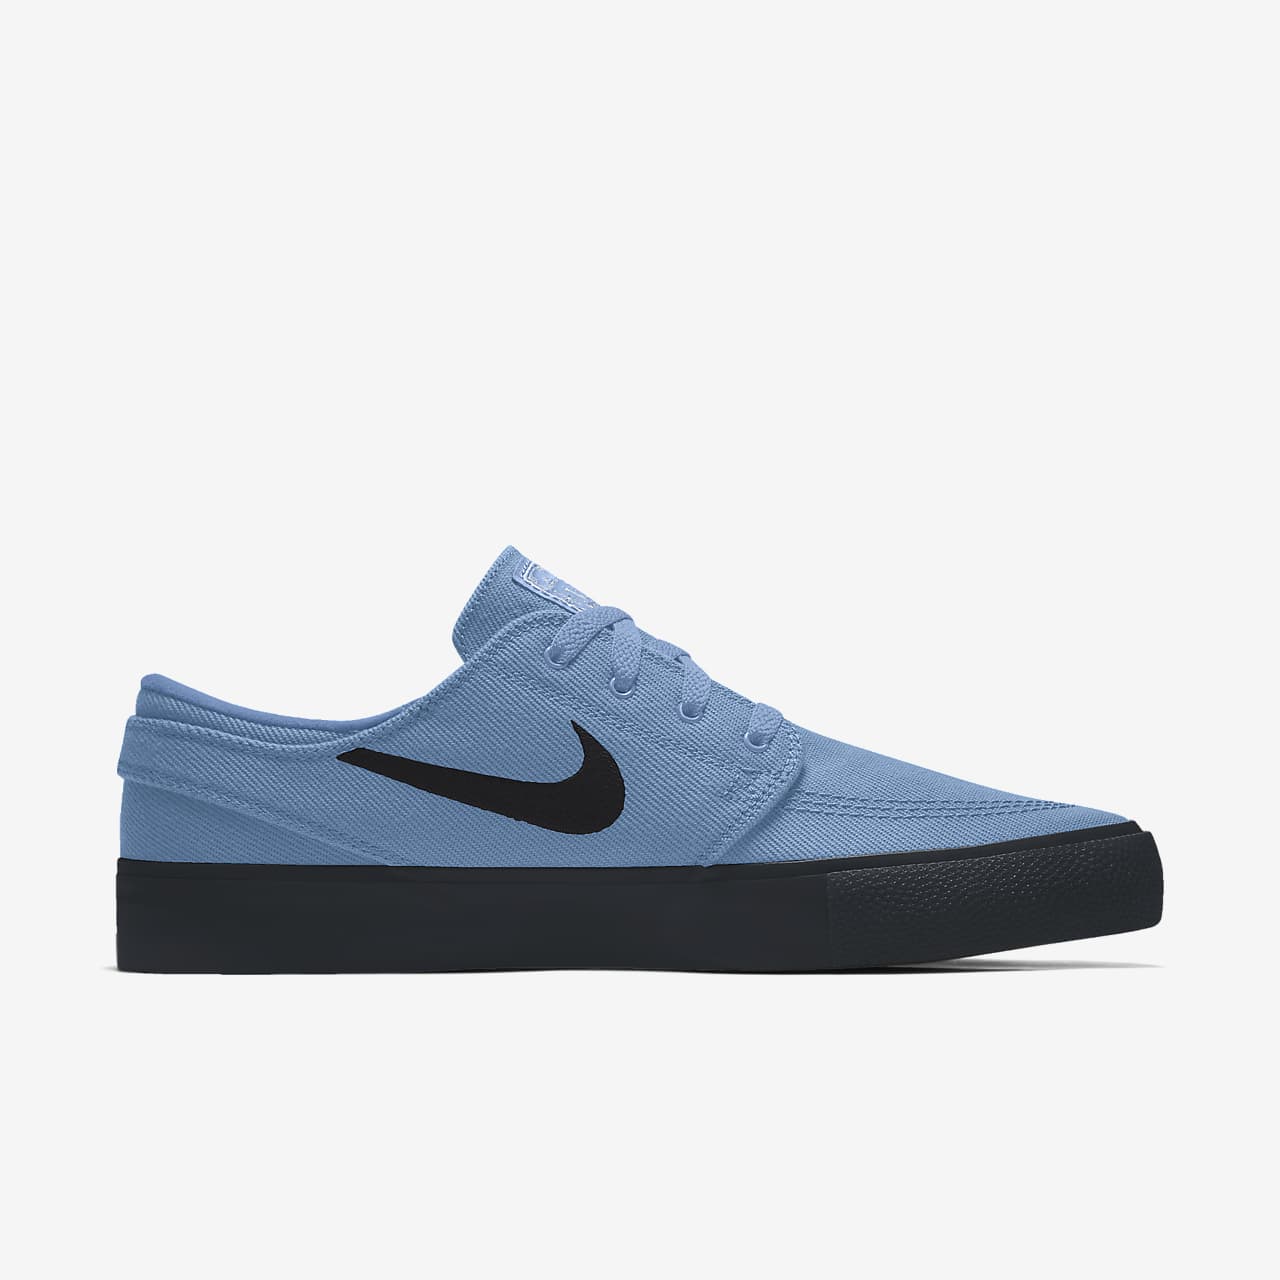 nike sb by you